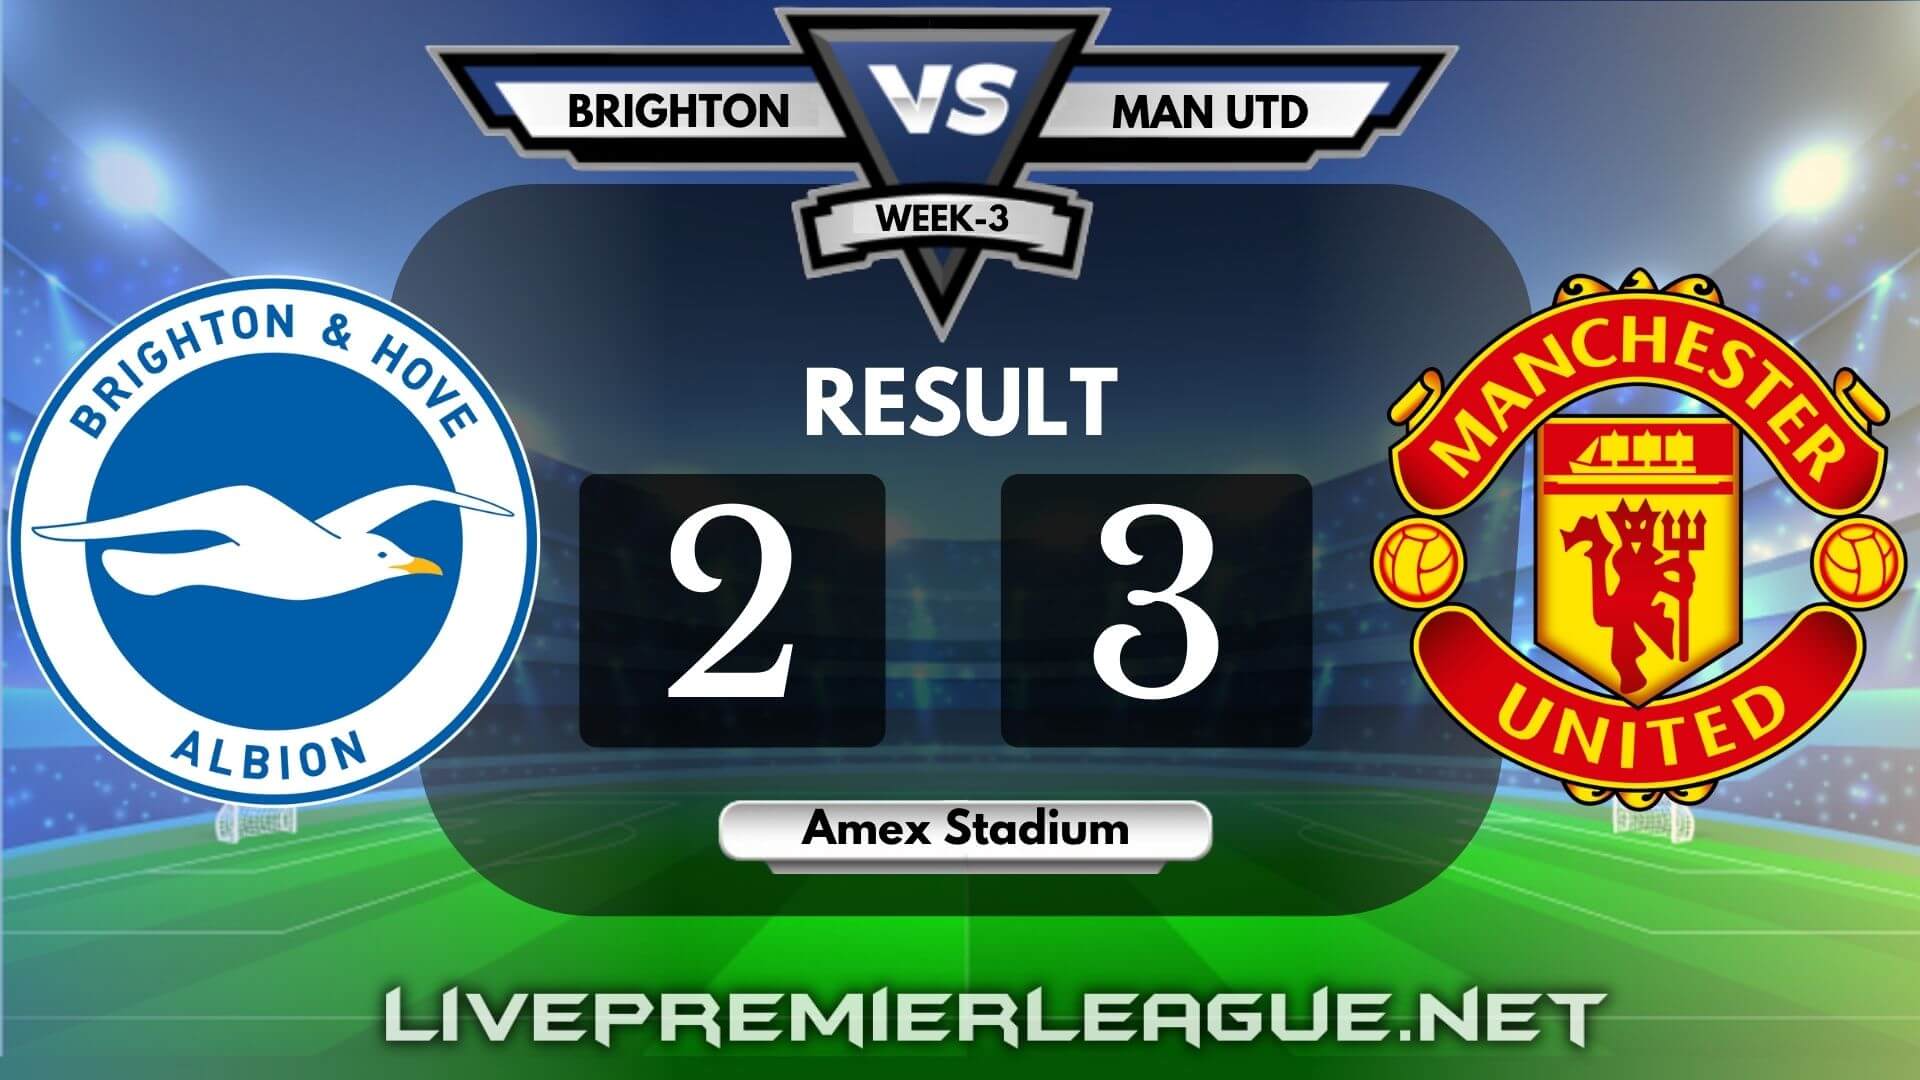 Brighton and Hove Albion Vs Manchester United | Week 3 Result 2020